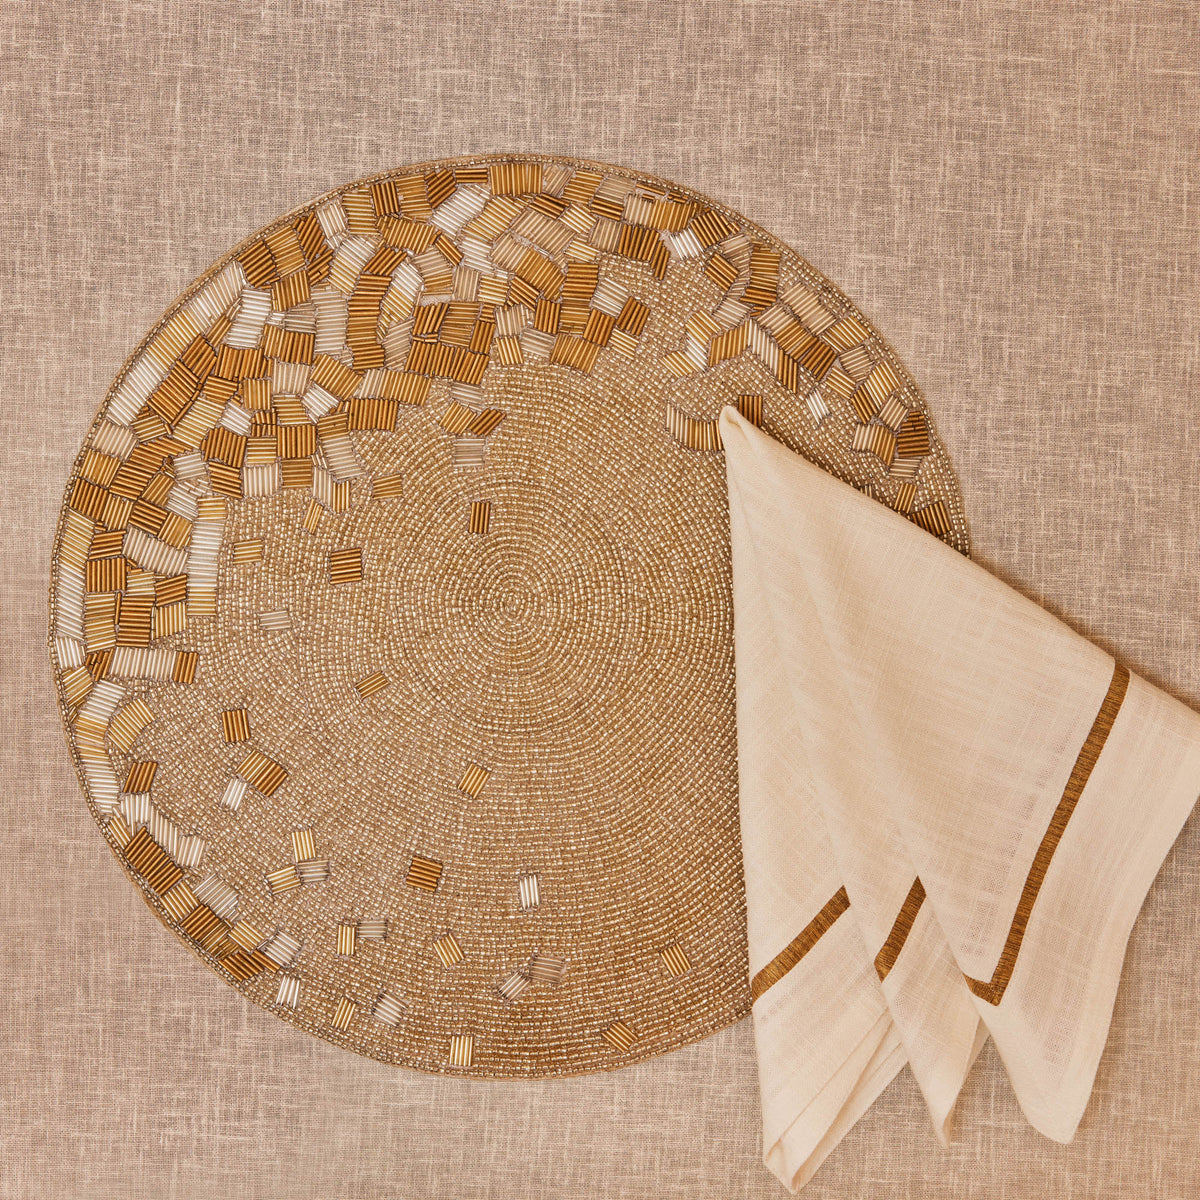 Regal Feast Silver Gold Beaded Table Mats Set of 4